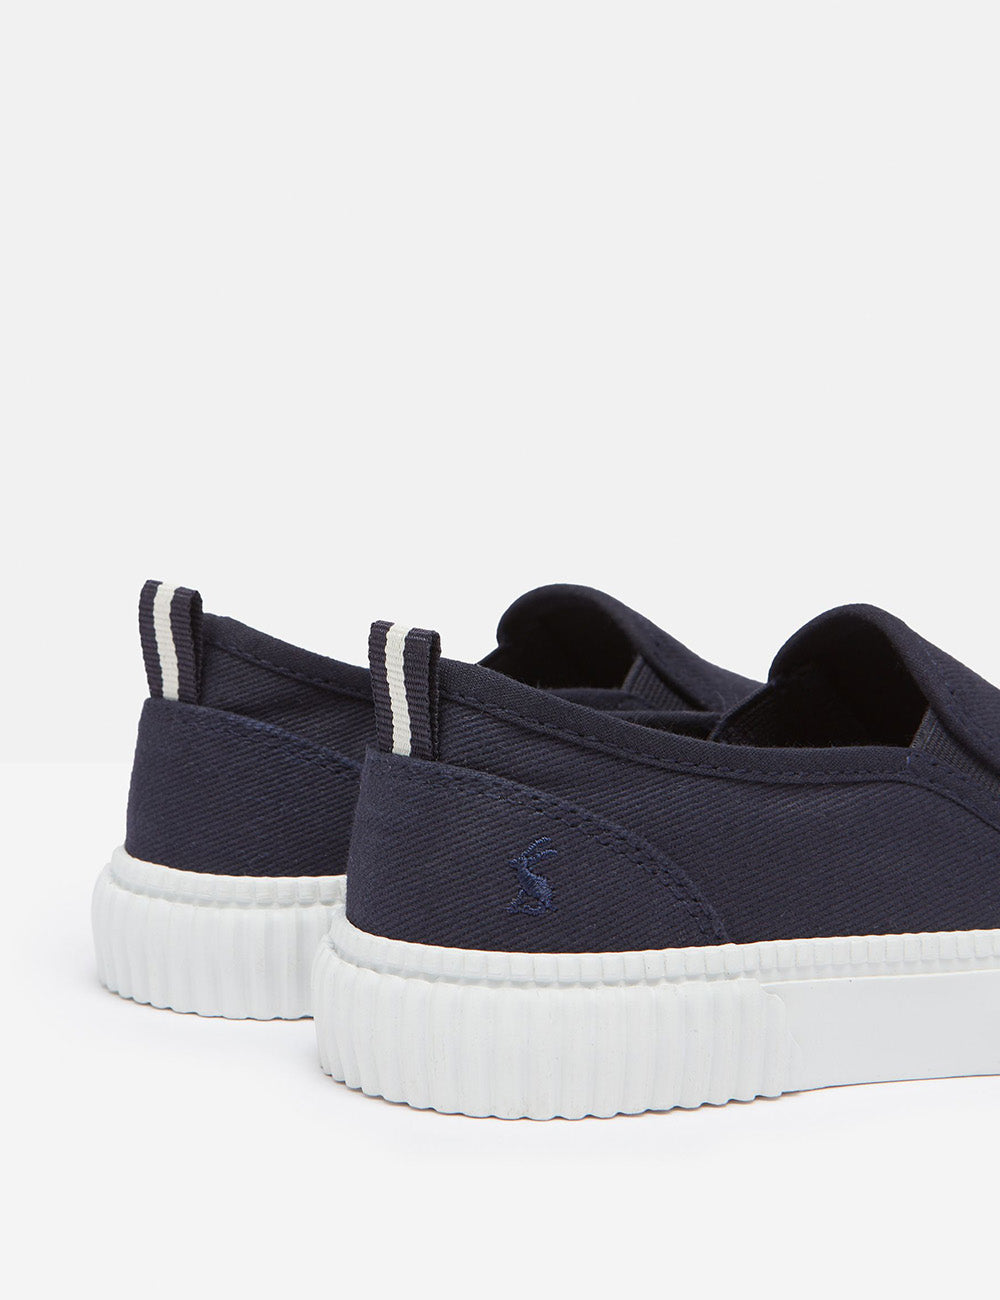 Joules Peasy Canvas Trainer - Blue